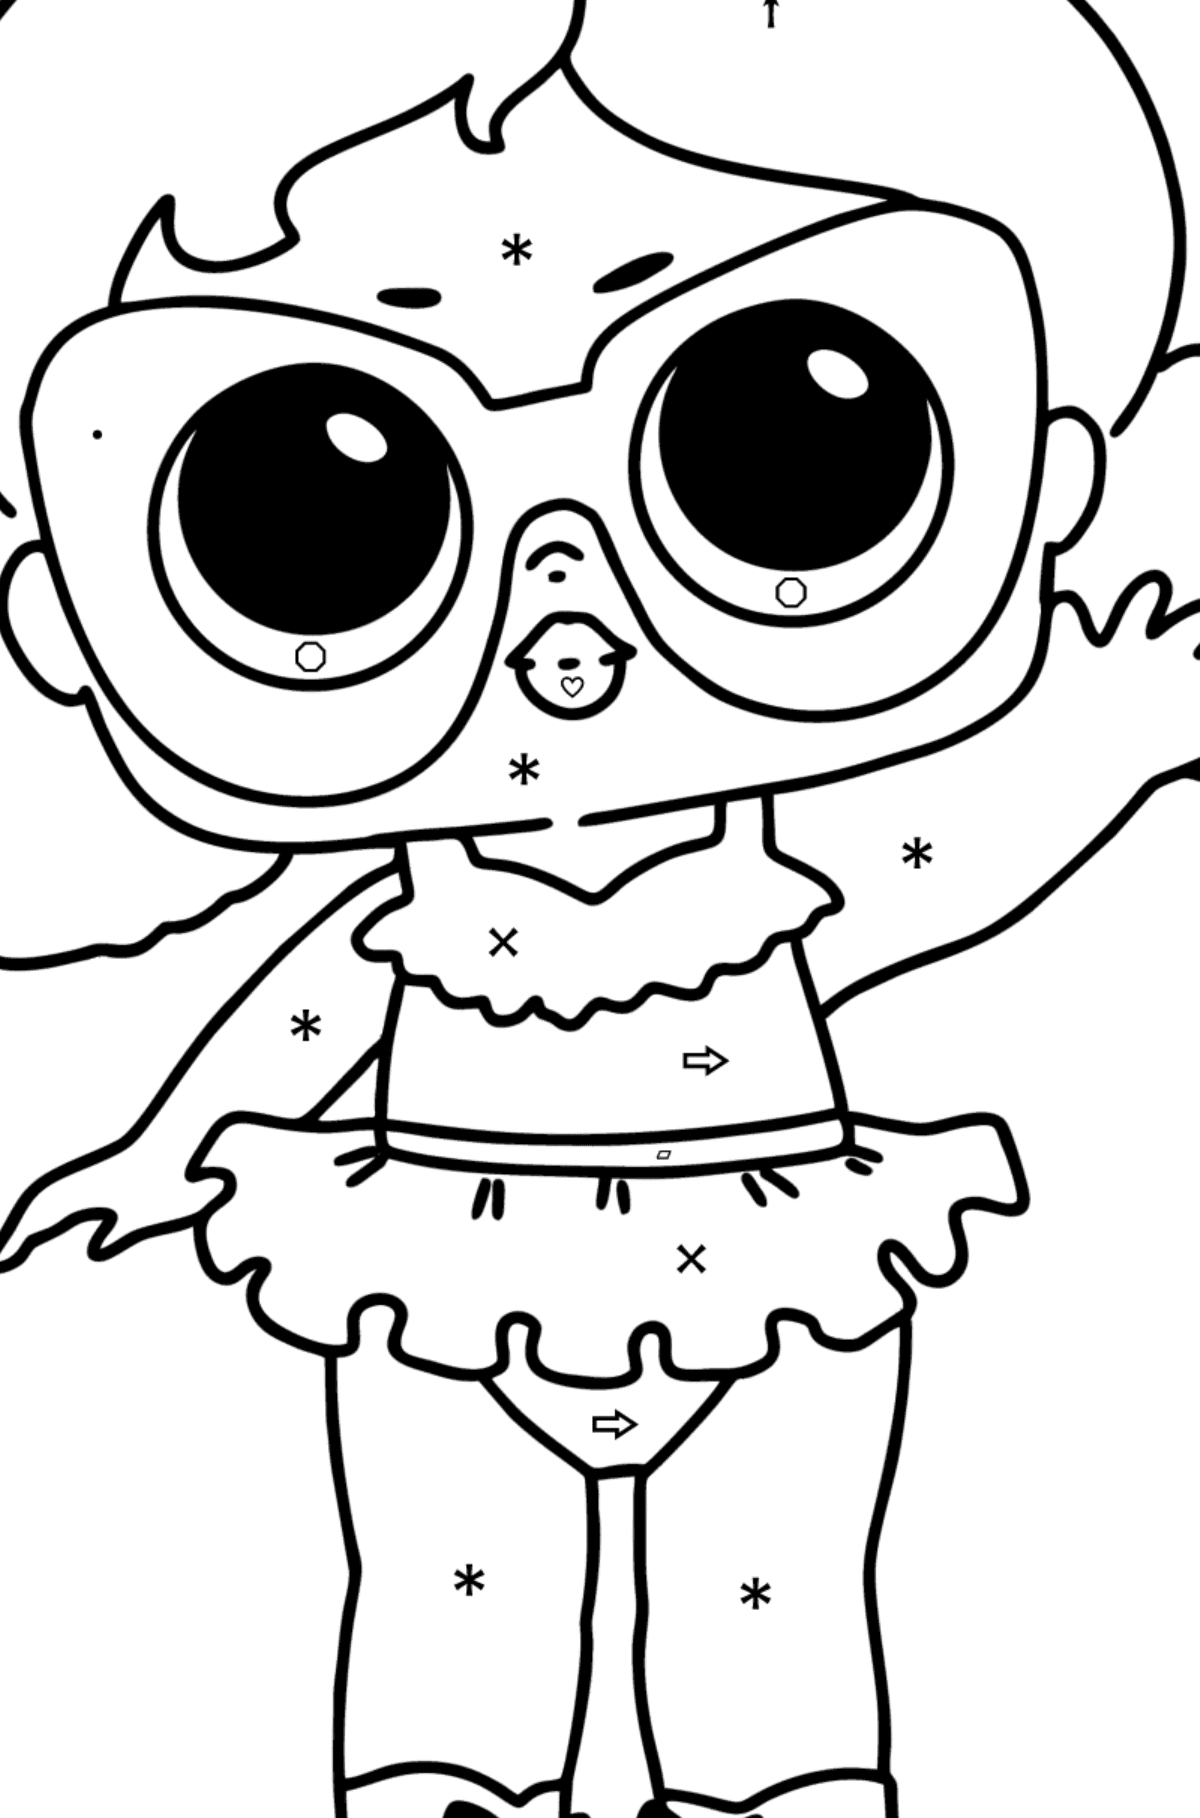 LOL Surprise Vacay babay coloring page - Coloring by Symbols and Geometric Shapes for Kids